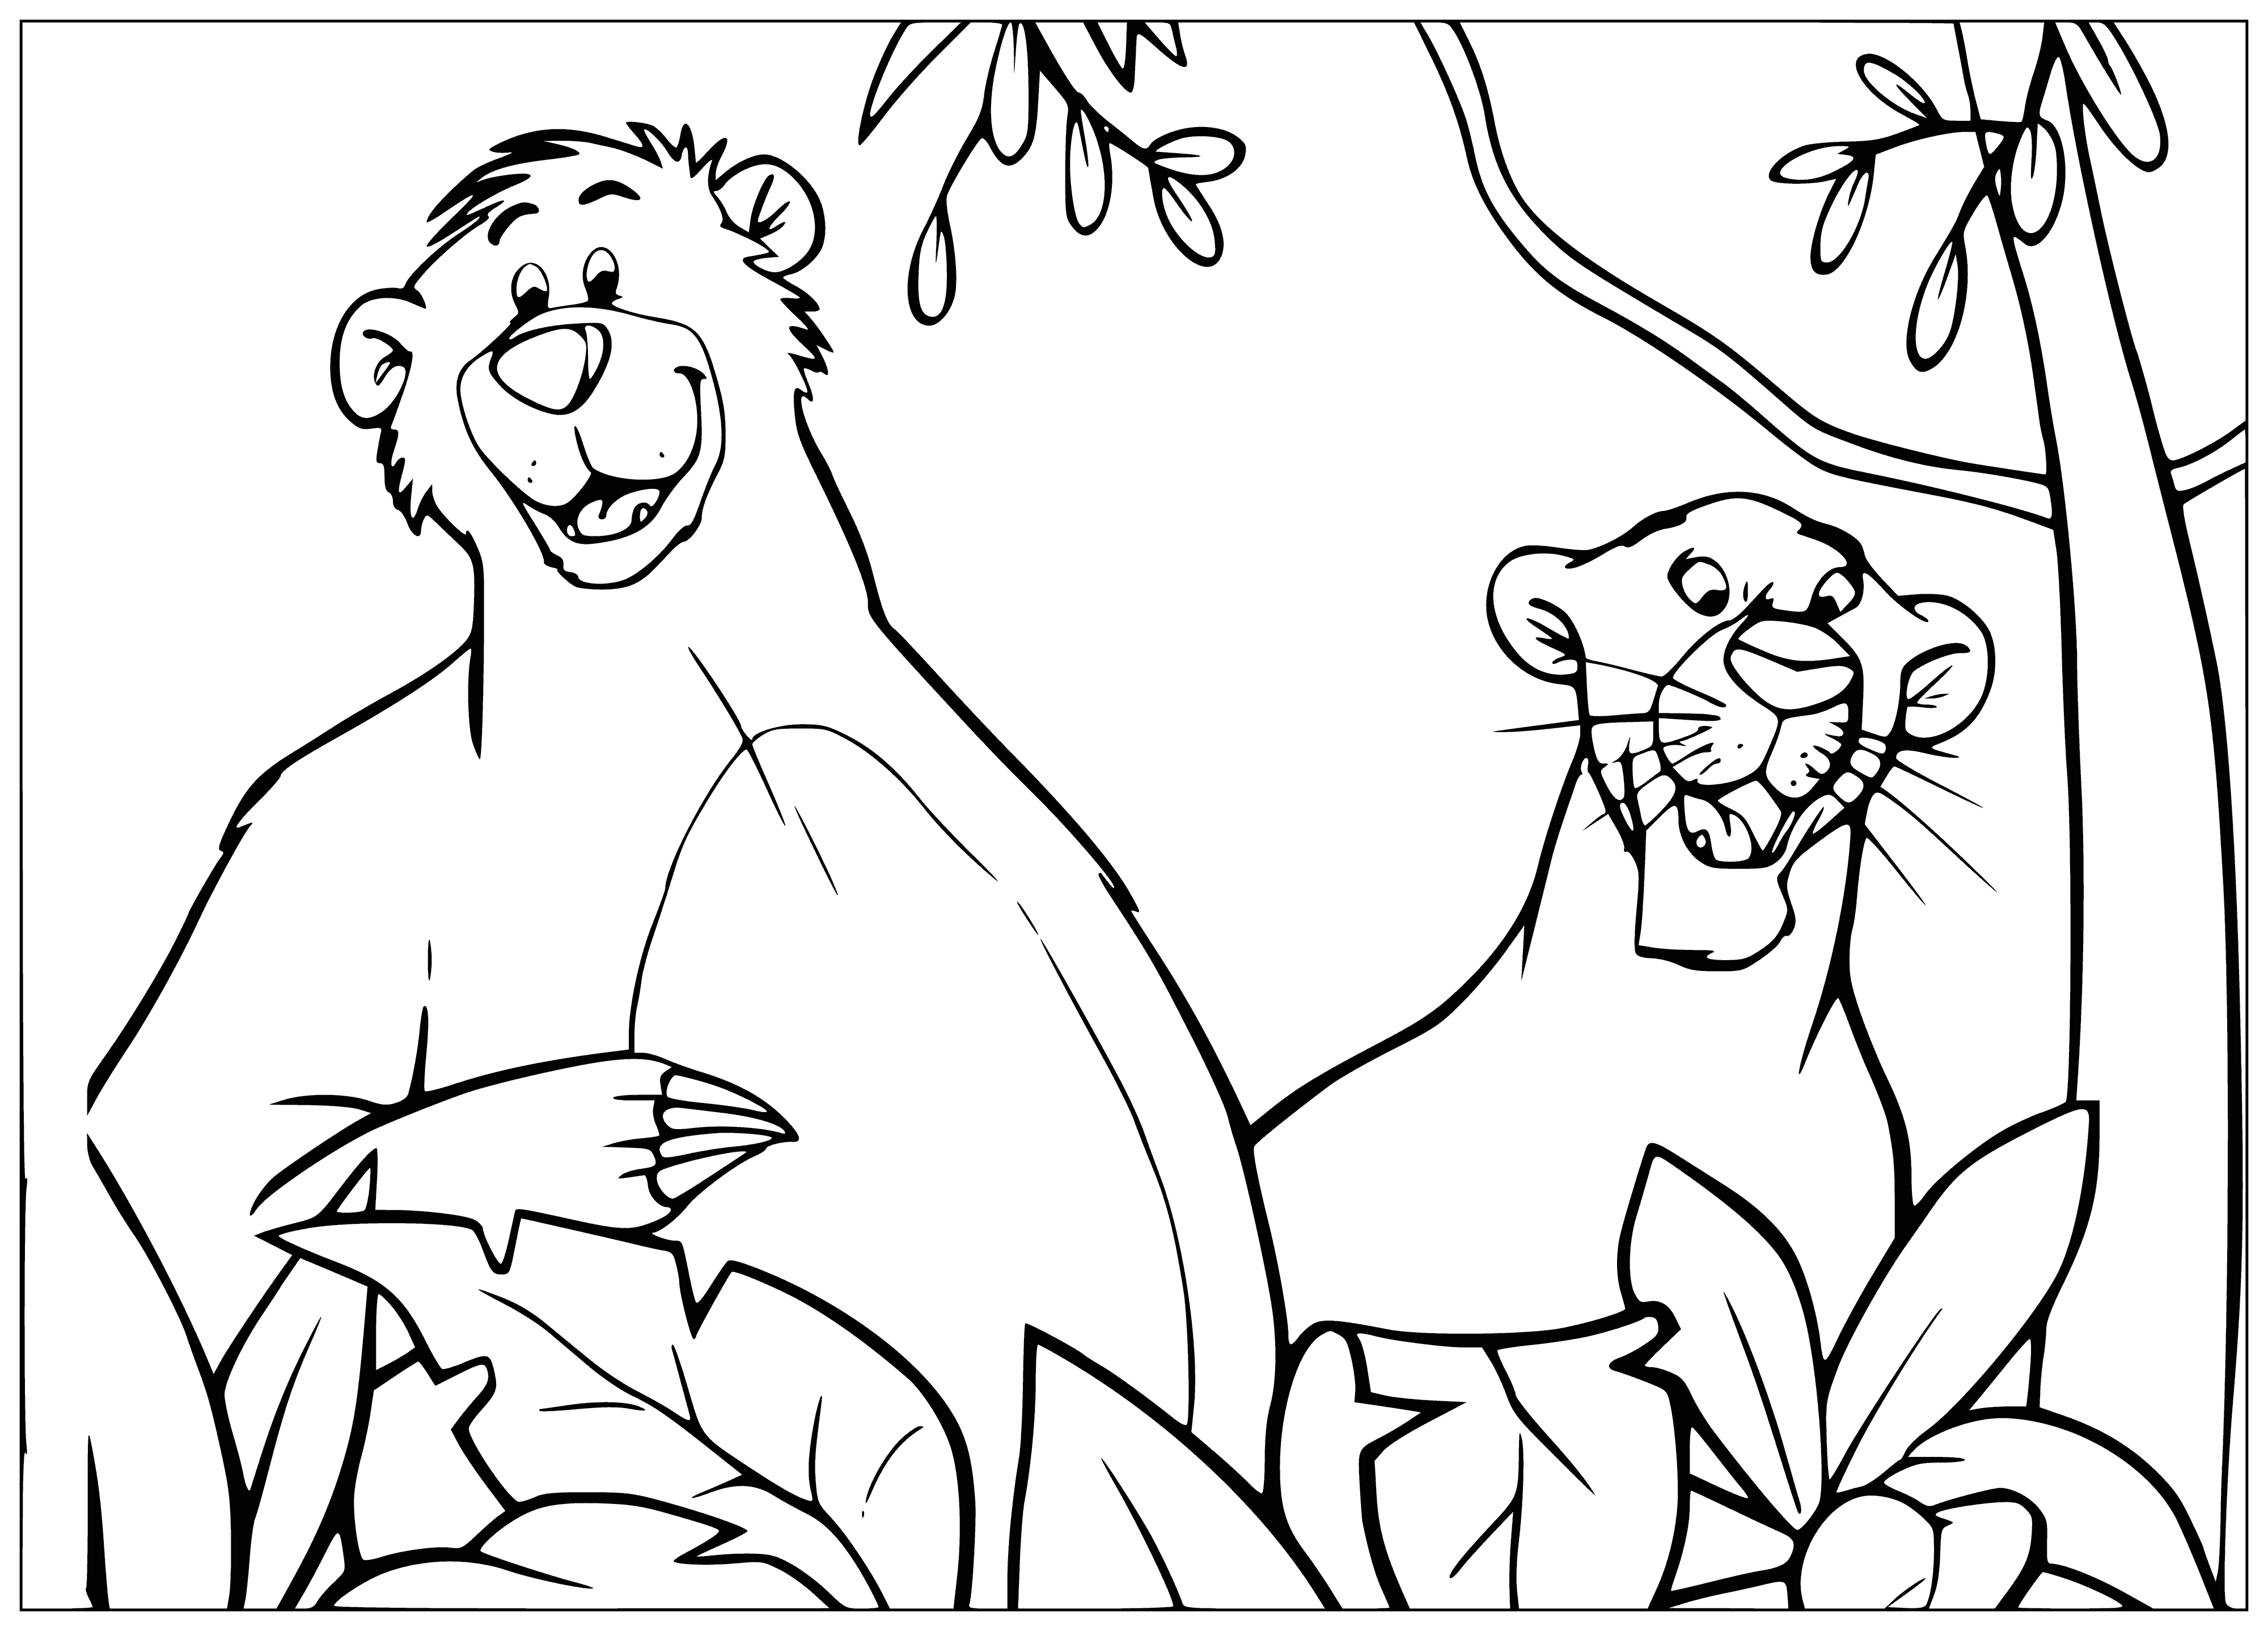 coloring page: A large tree, a striped snake, a big monkey, and a small tiger cub are on a coloring page looking up at tree. #coloring #art